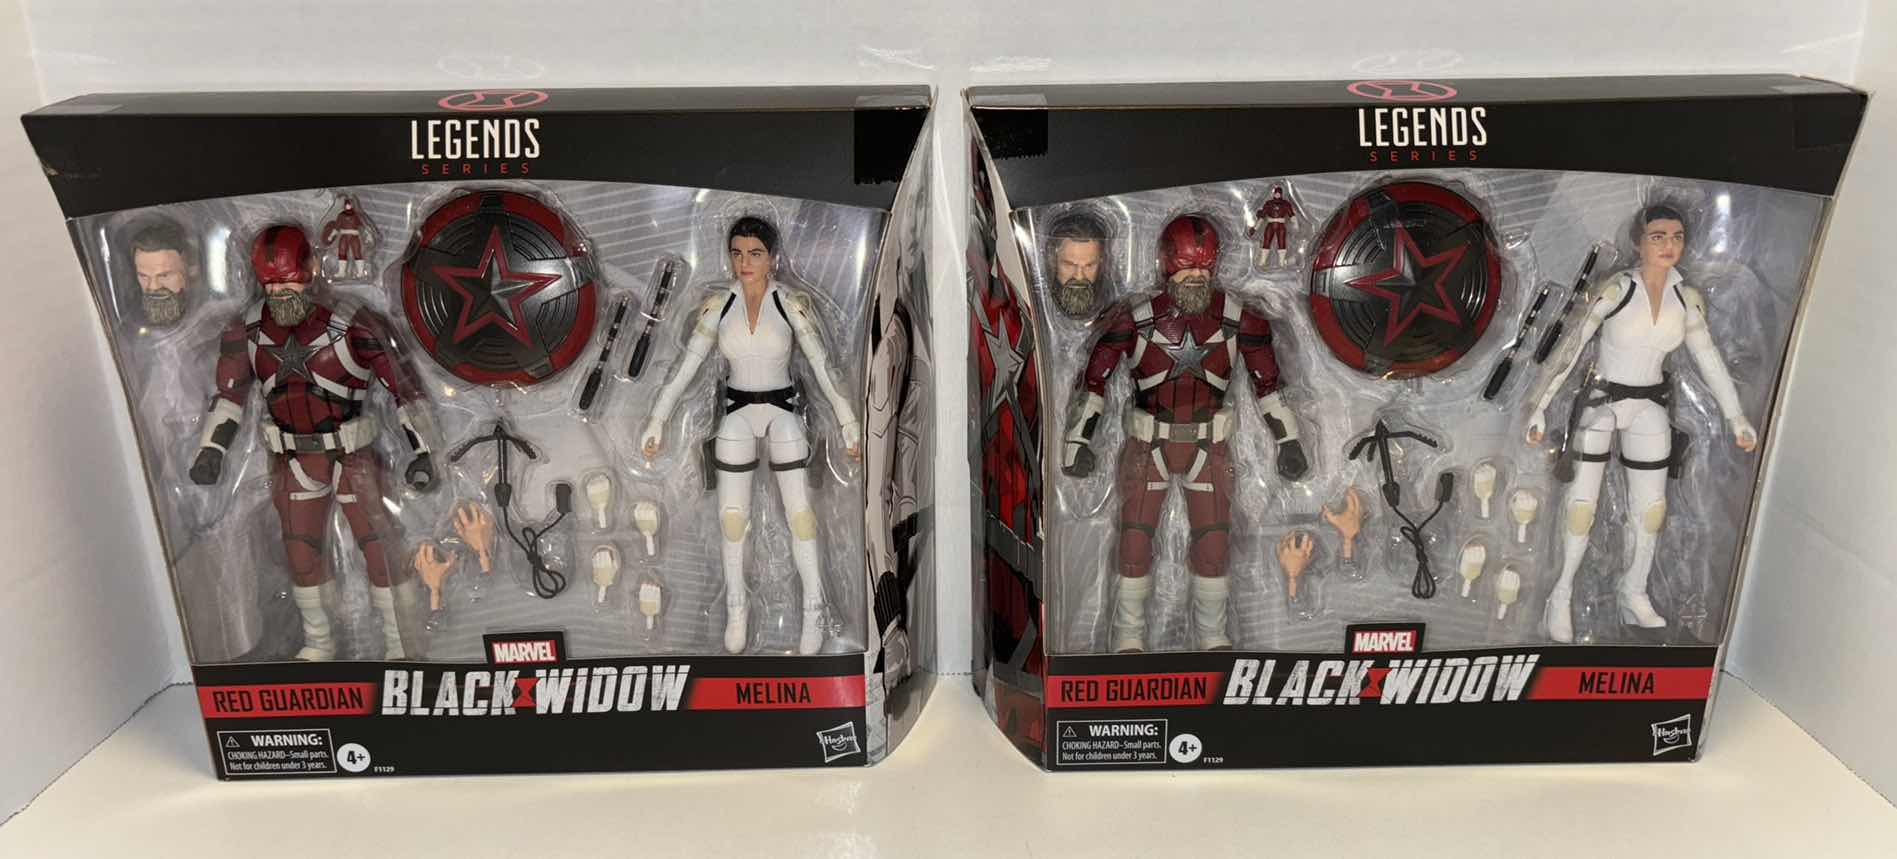 Photo 1 of NEW HASBRO MARVEL LEGENDS SERIES ACTION FIGURES & ACCESSORIES, BLACK WIDOW “RED GUARDIAN” & “MELINA” (2)